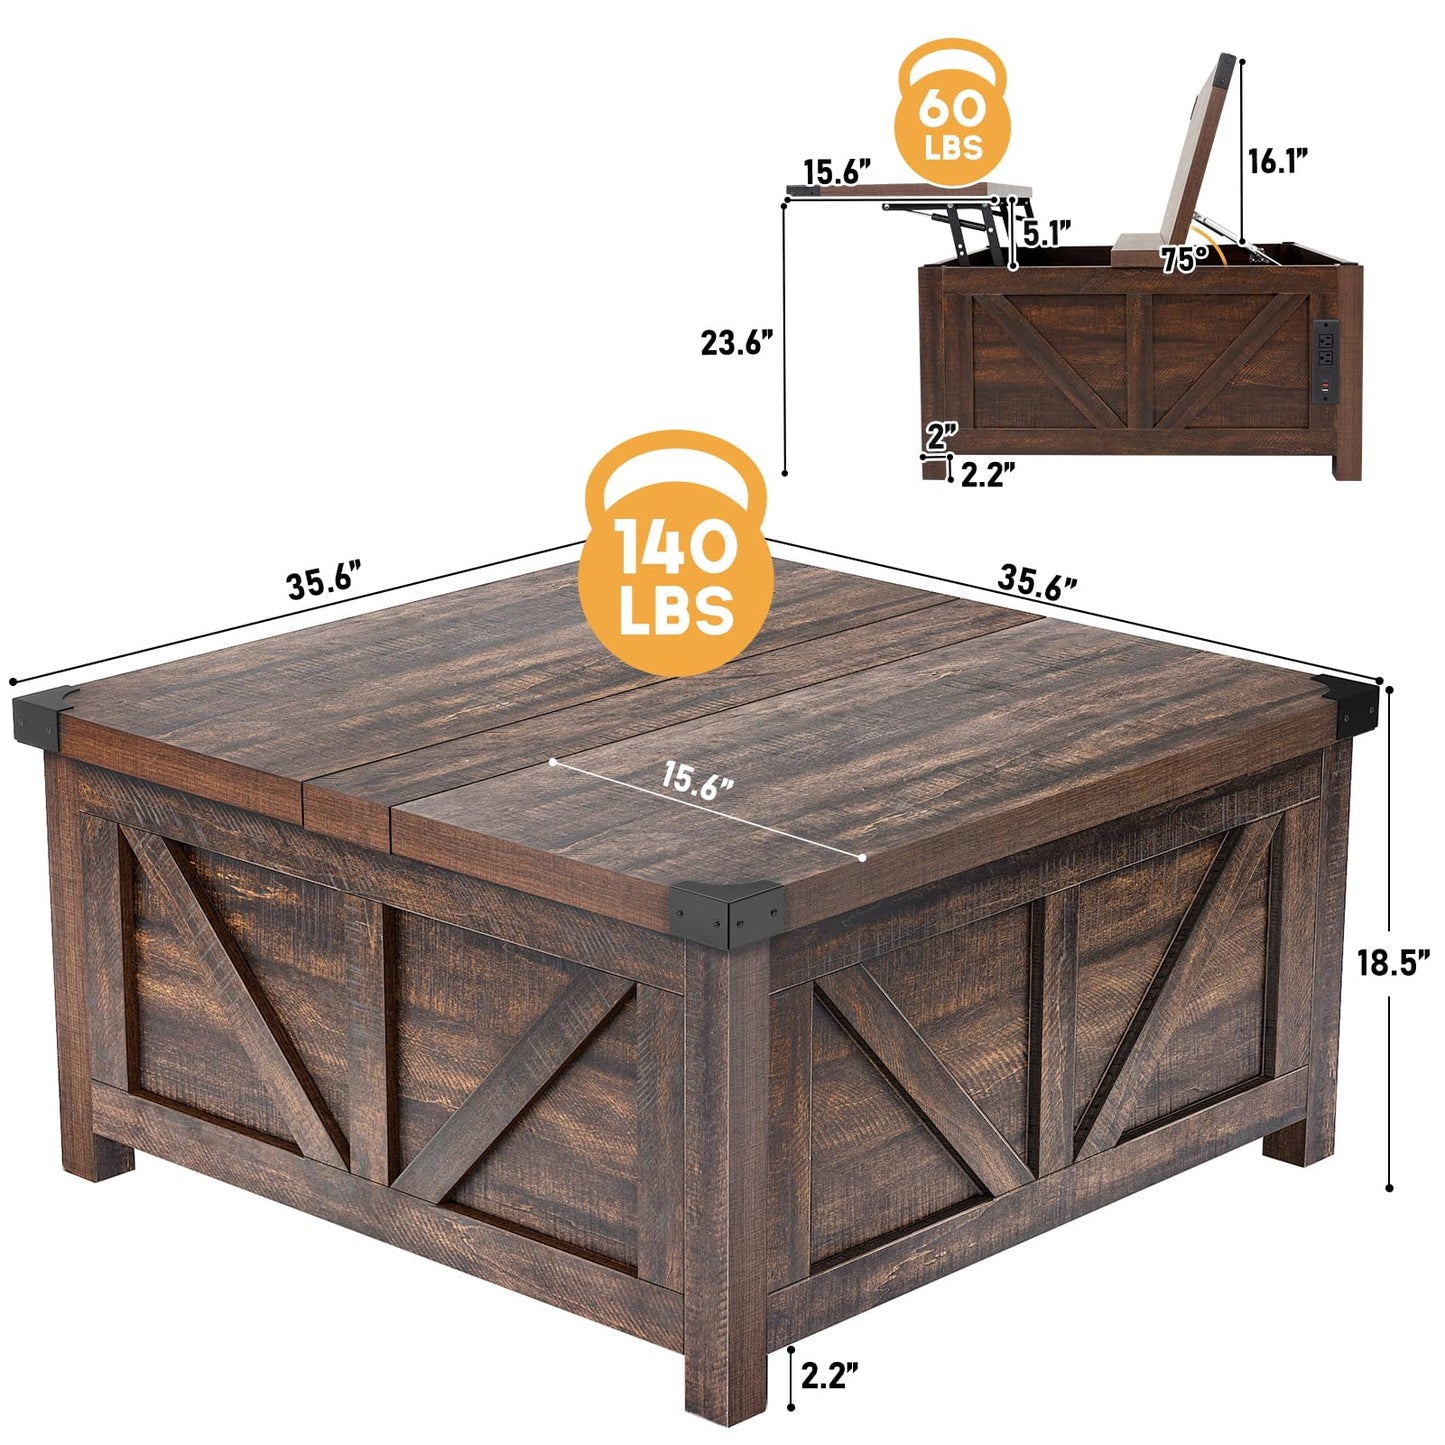 jimeimen Farmhouse Lift Top Coffee Table with Storage, Wood Square Center Table with Charging Station&USB Ports, Living Room Central Table w/Large Hidden Space, for Living Room, Bedroom, Home Office